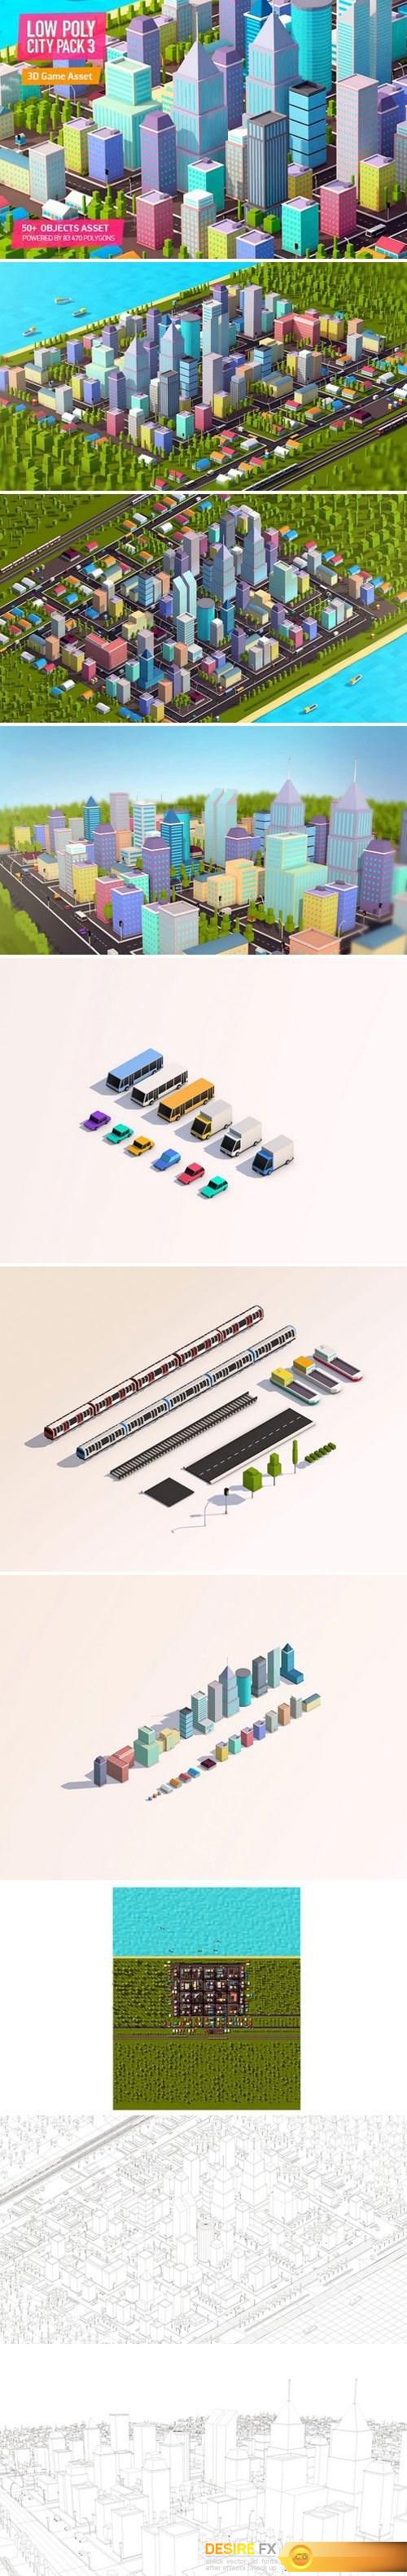 CM - Low Poly City Pack 3 1452374